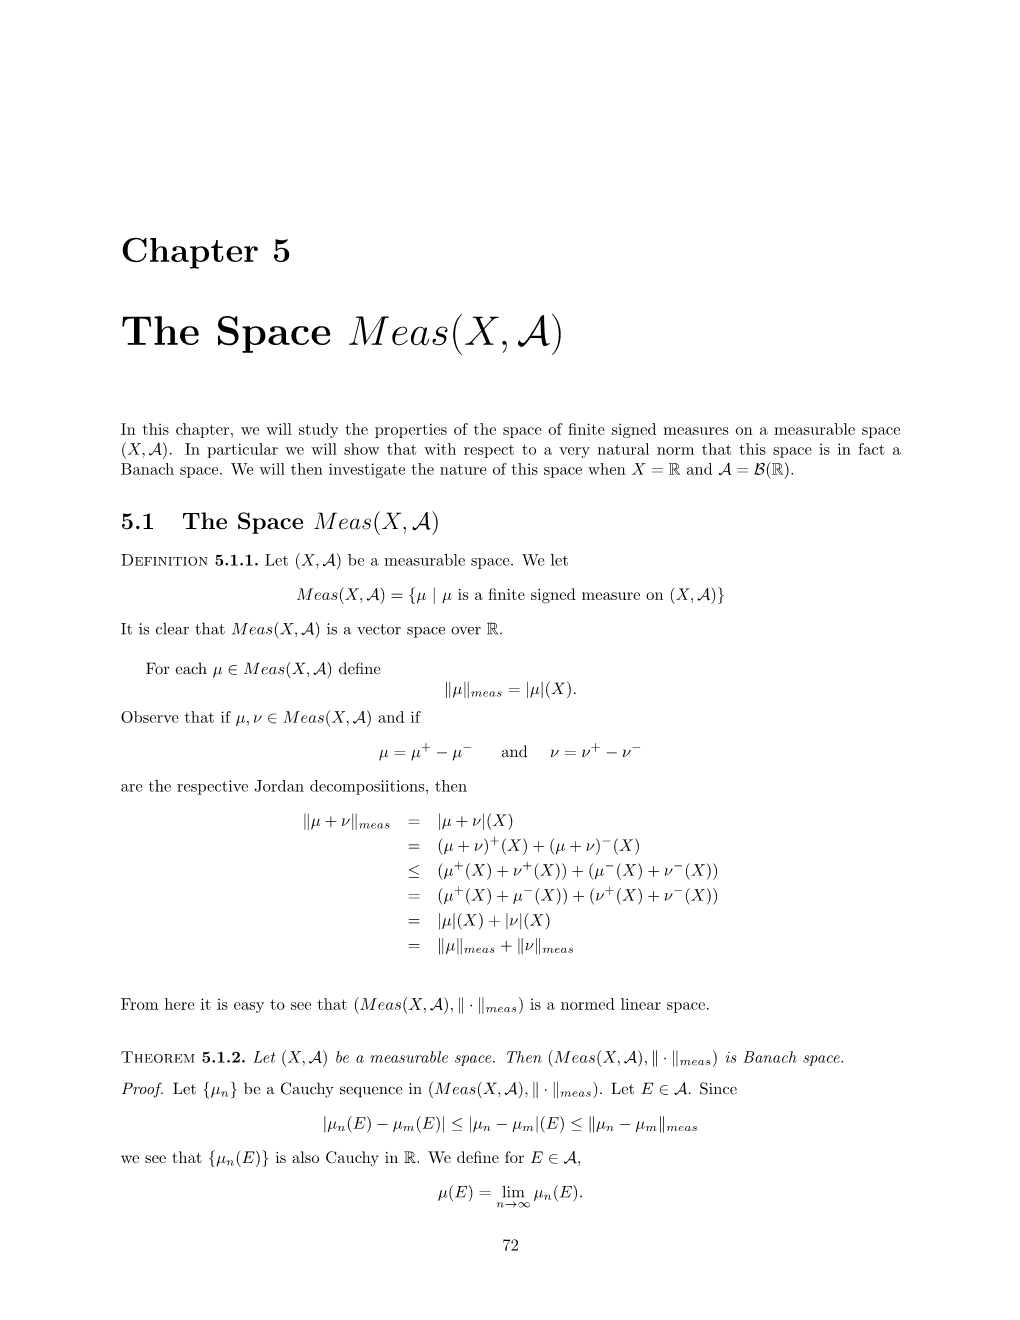 The Space Meas(X,A)